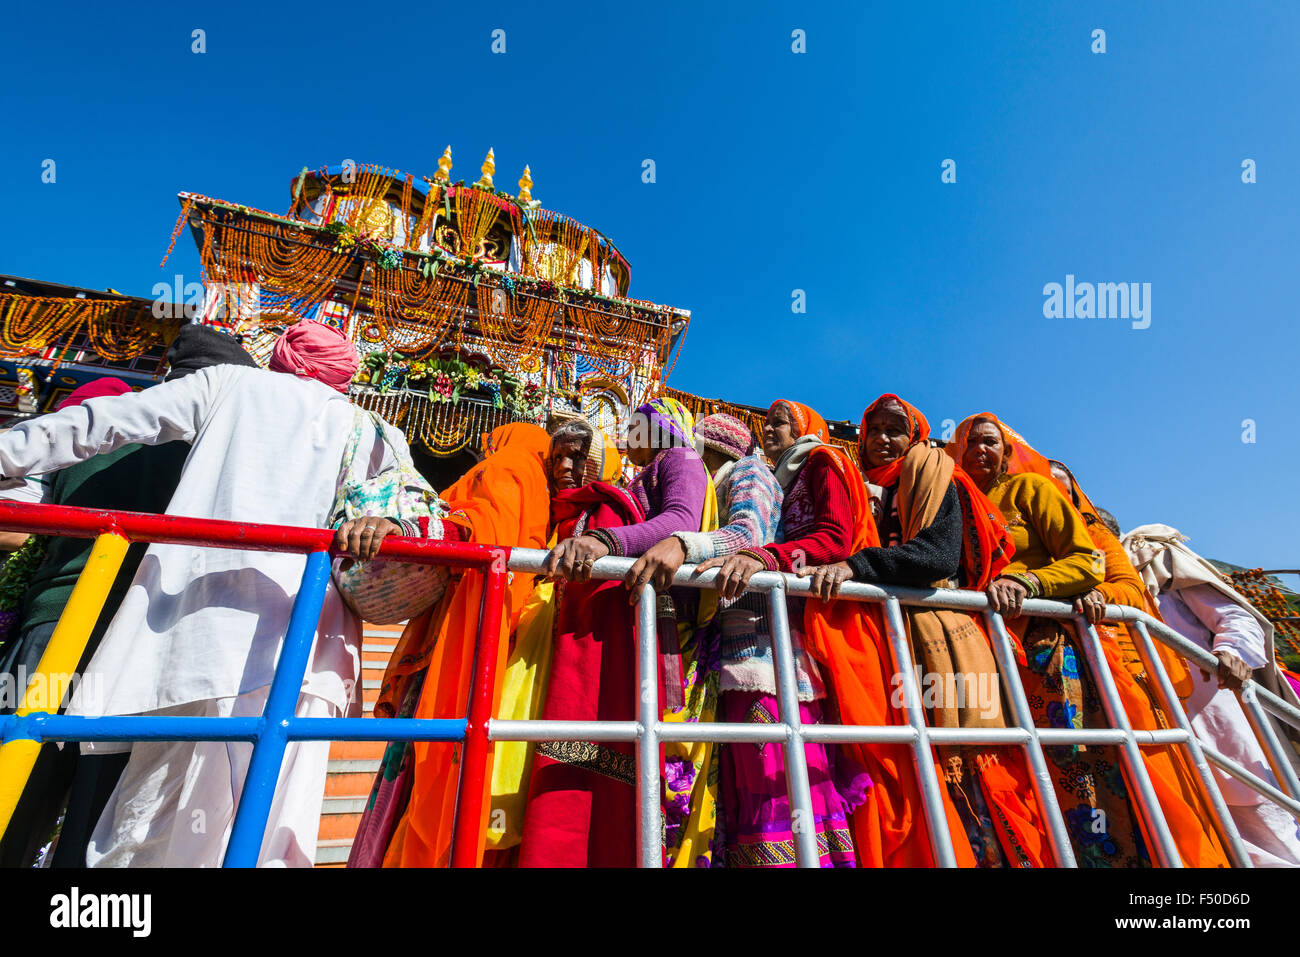 Many pilgrims are gathering in front of the colorful Badrinath Temple, one of the Dschar Dham destinations Stock Photo